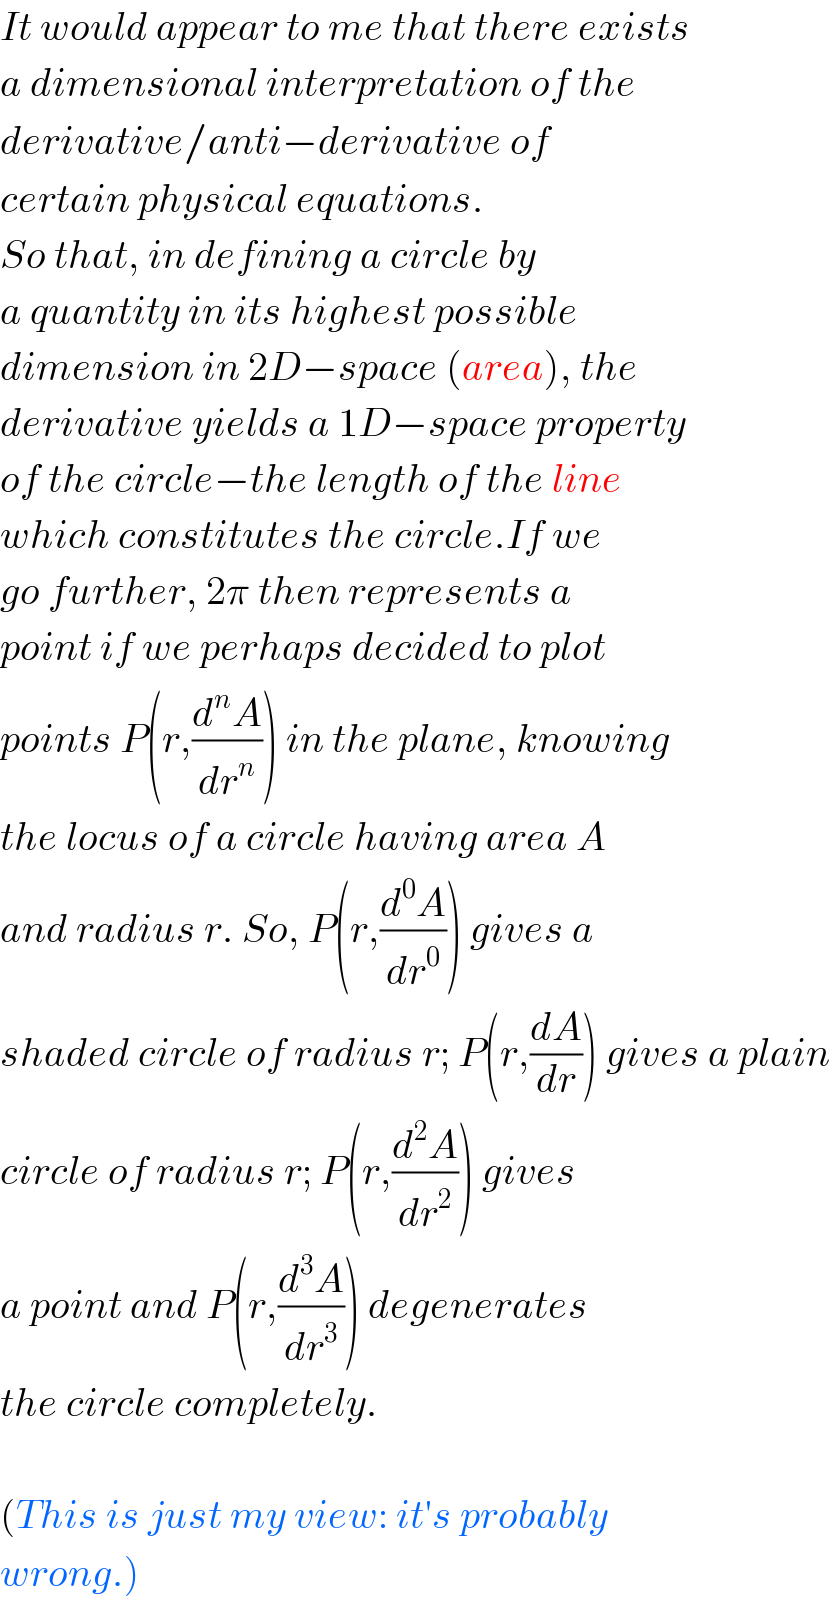 It would appear to me that there exists  a dimensional interpretation of the  derivative/anti−derivative of   certain physical equations.   So that, in defining a circle by  a quantity in its highest possible  dimension in 2D−space (area), the   derivative yields a 1D−space property  of the circle−the length of the line  which constitutes the circle.If we  go further, 2π then represents a  point if we perhaps decided to plot  points P(r,(d^n A/dr^n )) in the plane, knowing  the locus of a circle having area A  and radius r. So, P(r,(d^0 A/dr^0 )) gives a  shaded circle of radius r; P(r,(dA/dr)) gives a plain  circle of radius r; P(r,(d^2 A/dr^2 )) gives  a point and P(r,(d^3 A/dr^3 )) degenerates  the circle completely.    (This is just my view: it′s probably  wrong.)  